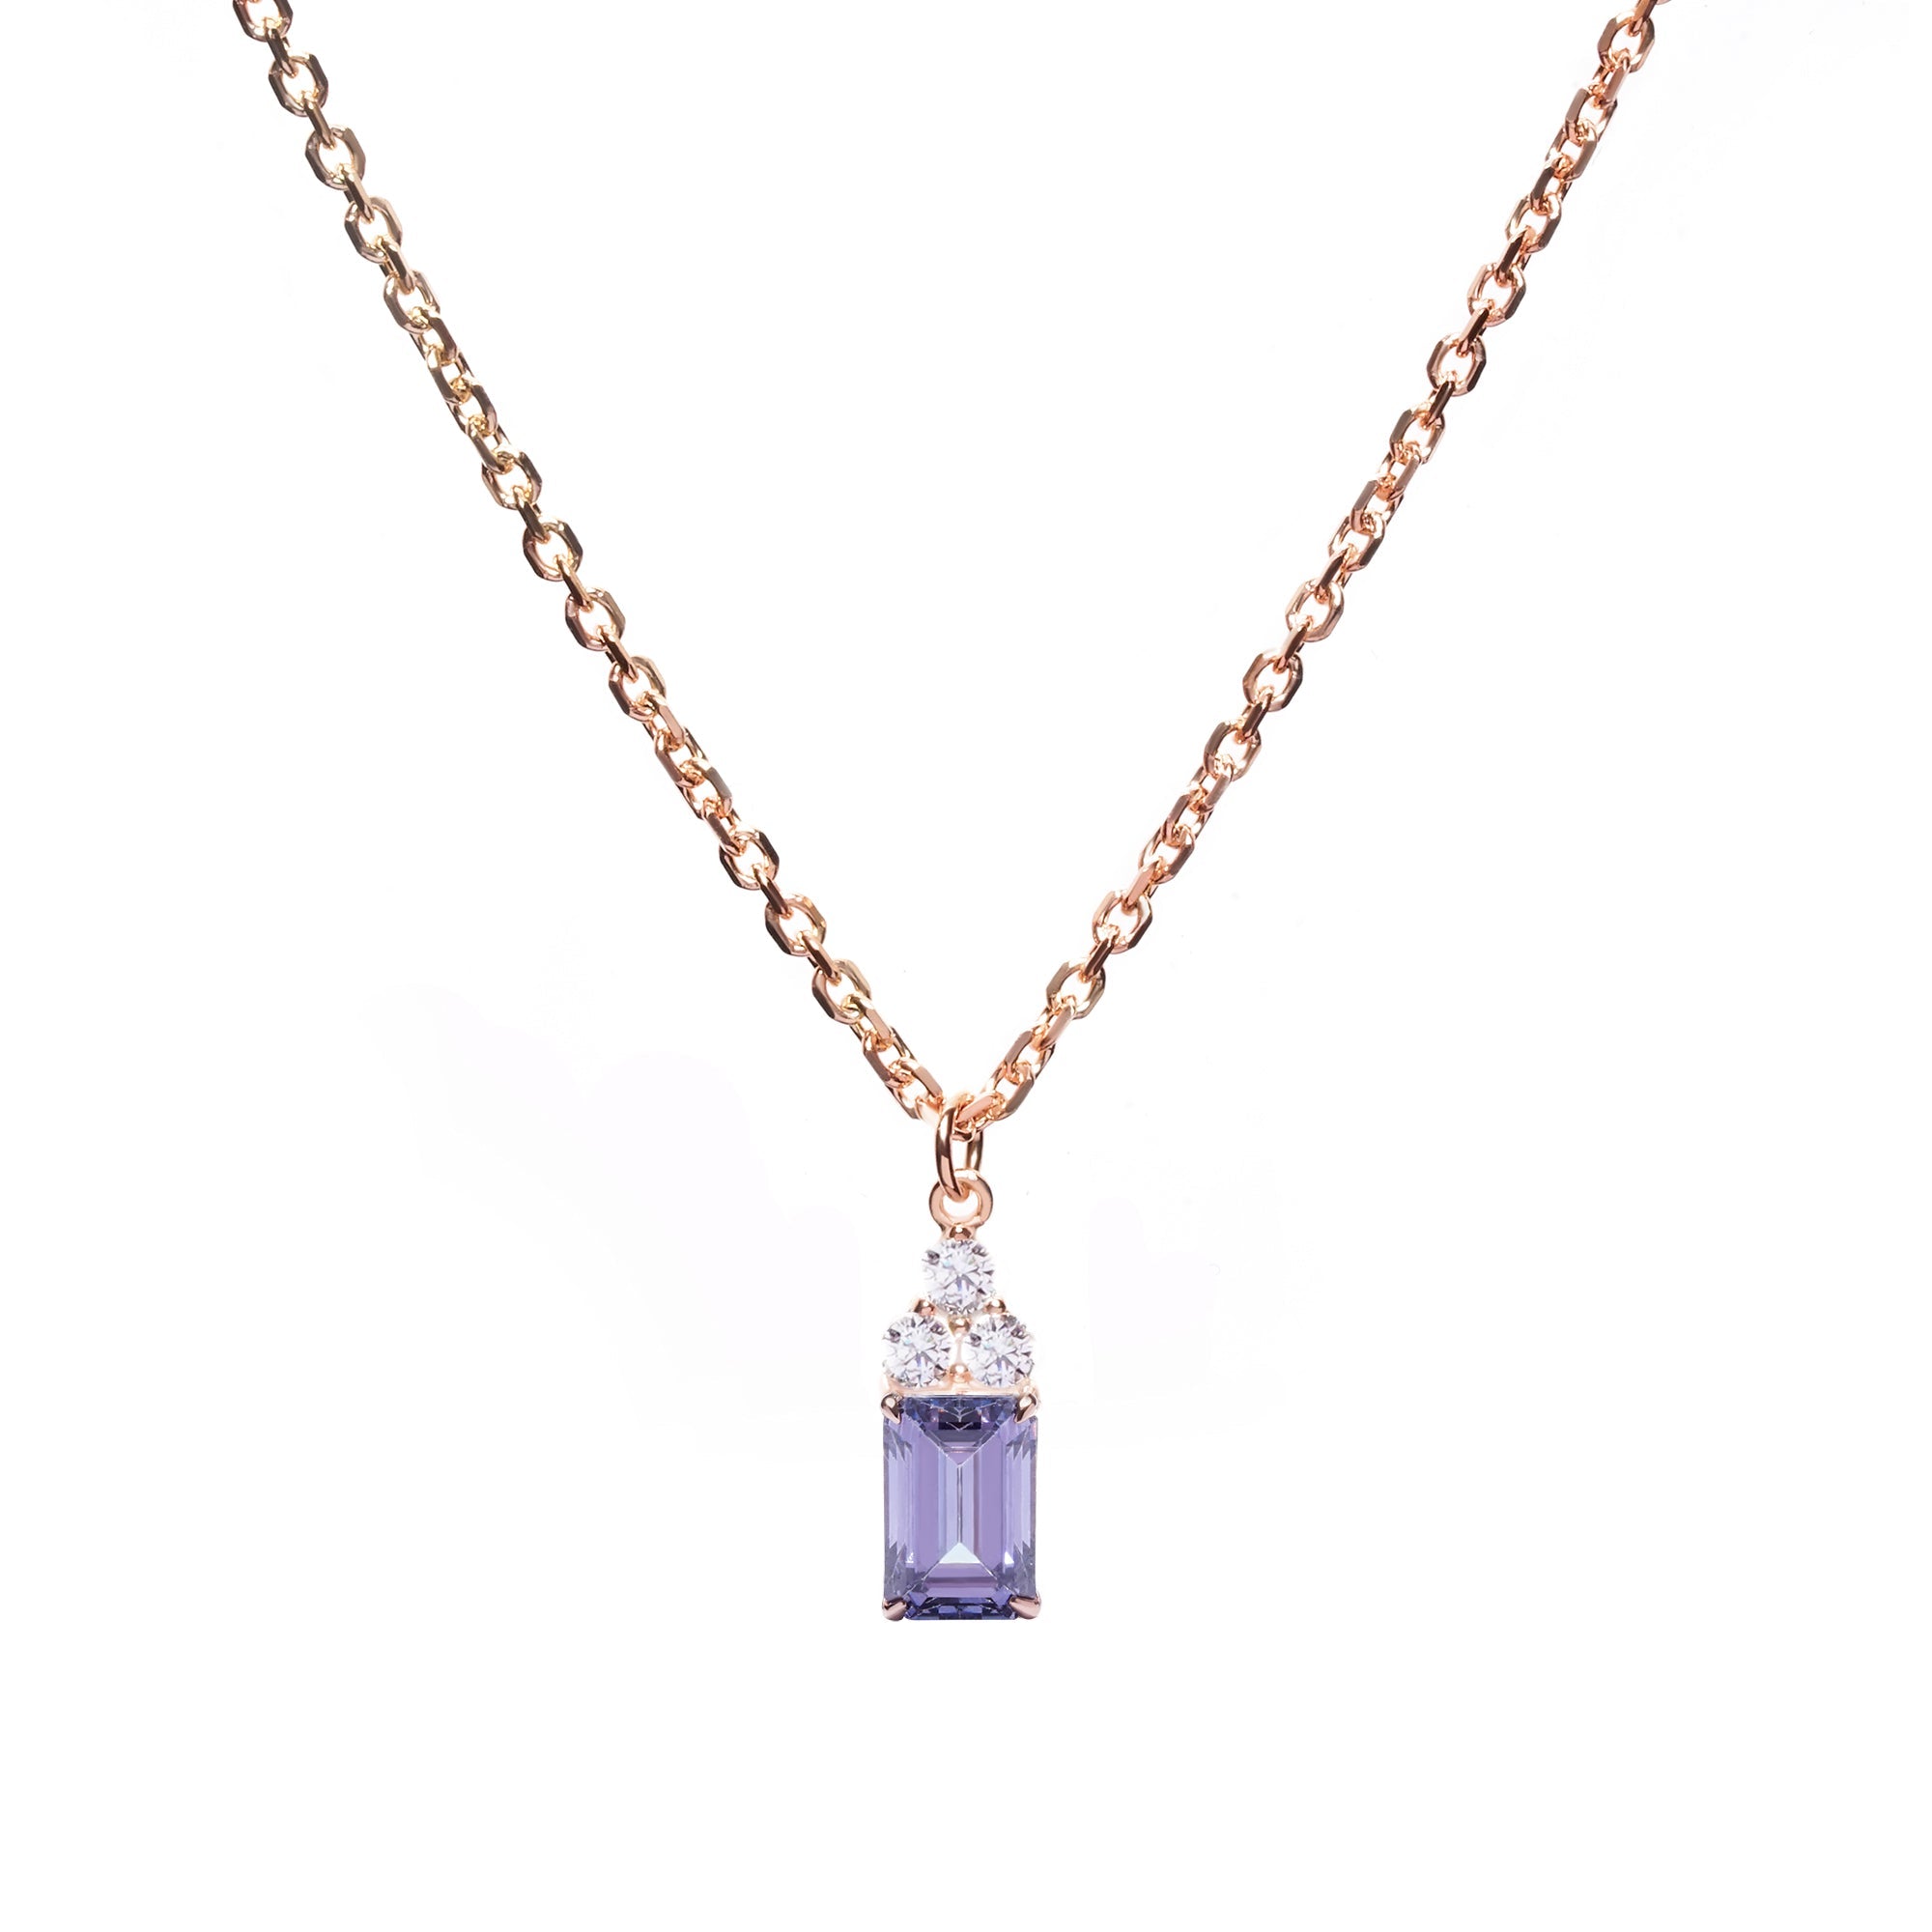 Silva Gold Necklace - Twilight Collection - Juene Jewelry